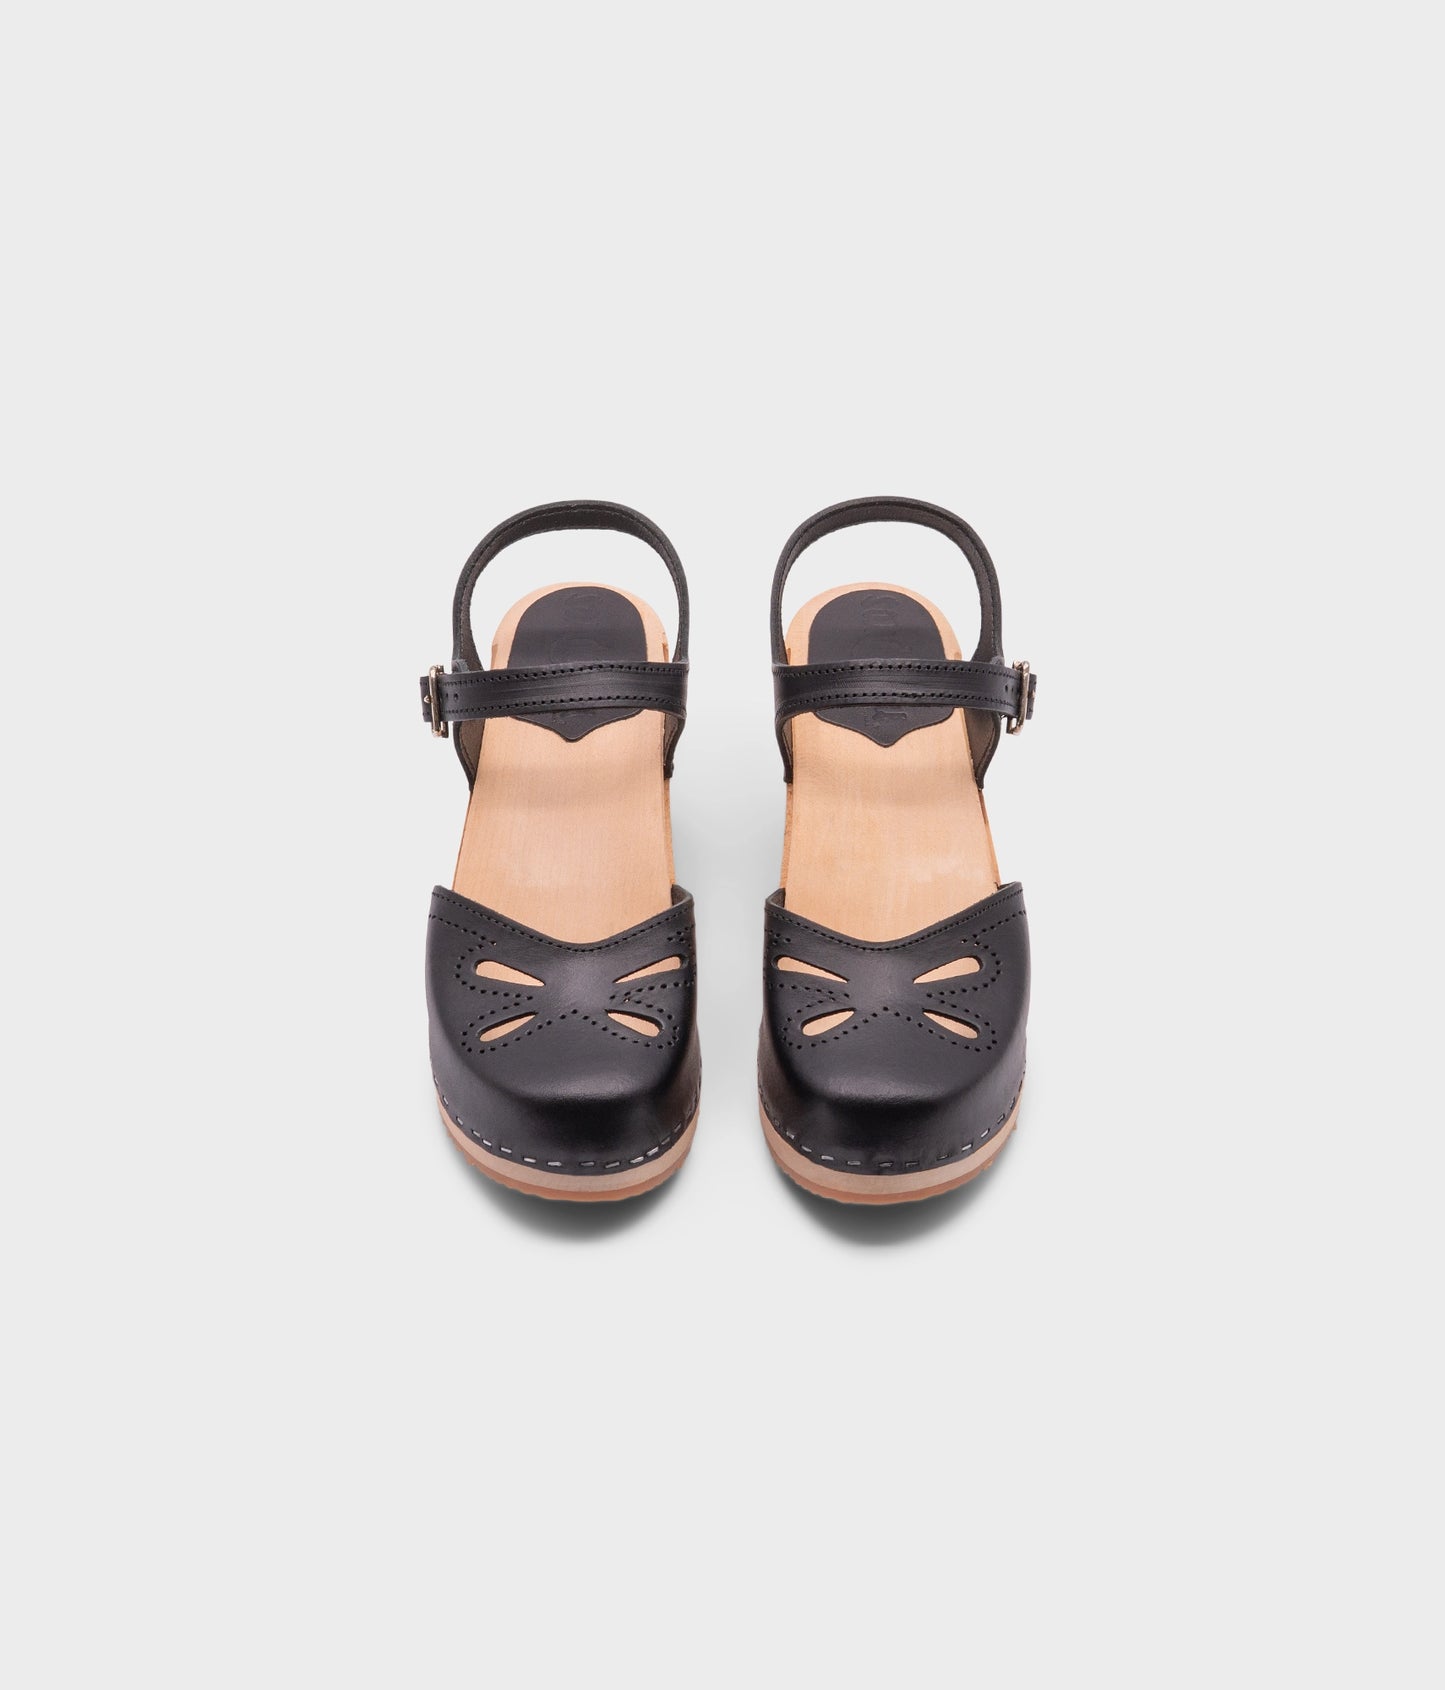 high-heeled clog sandal in black vegetable tanned leather with a blossom cut-out over the toe stapled on a light wooden base